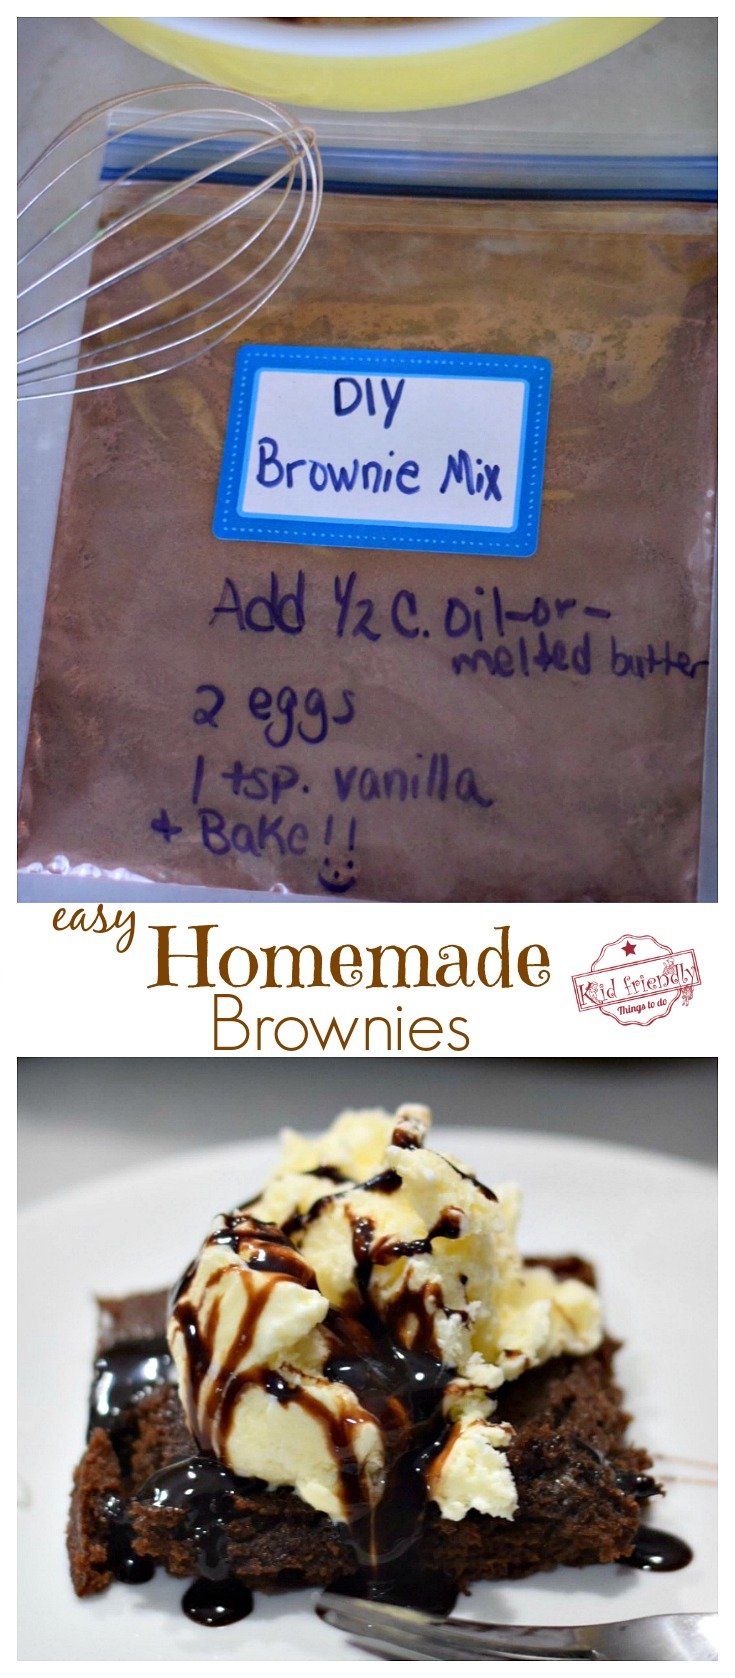 Easy Homemade Brownies Recipe - Make your own Easy Brownie Mix with a few simple ingredients. These are the best! Never buy boxed brownies again! - www.kidfriendlythingstodo.com